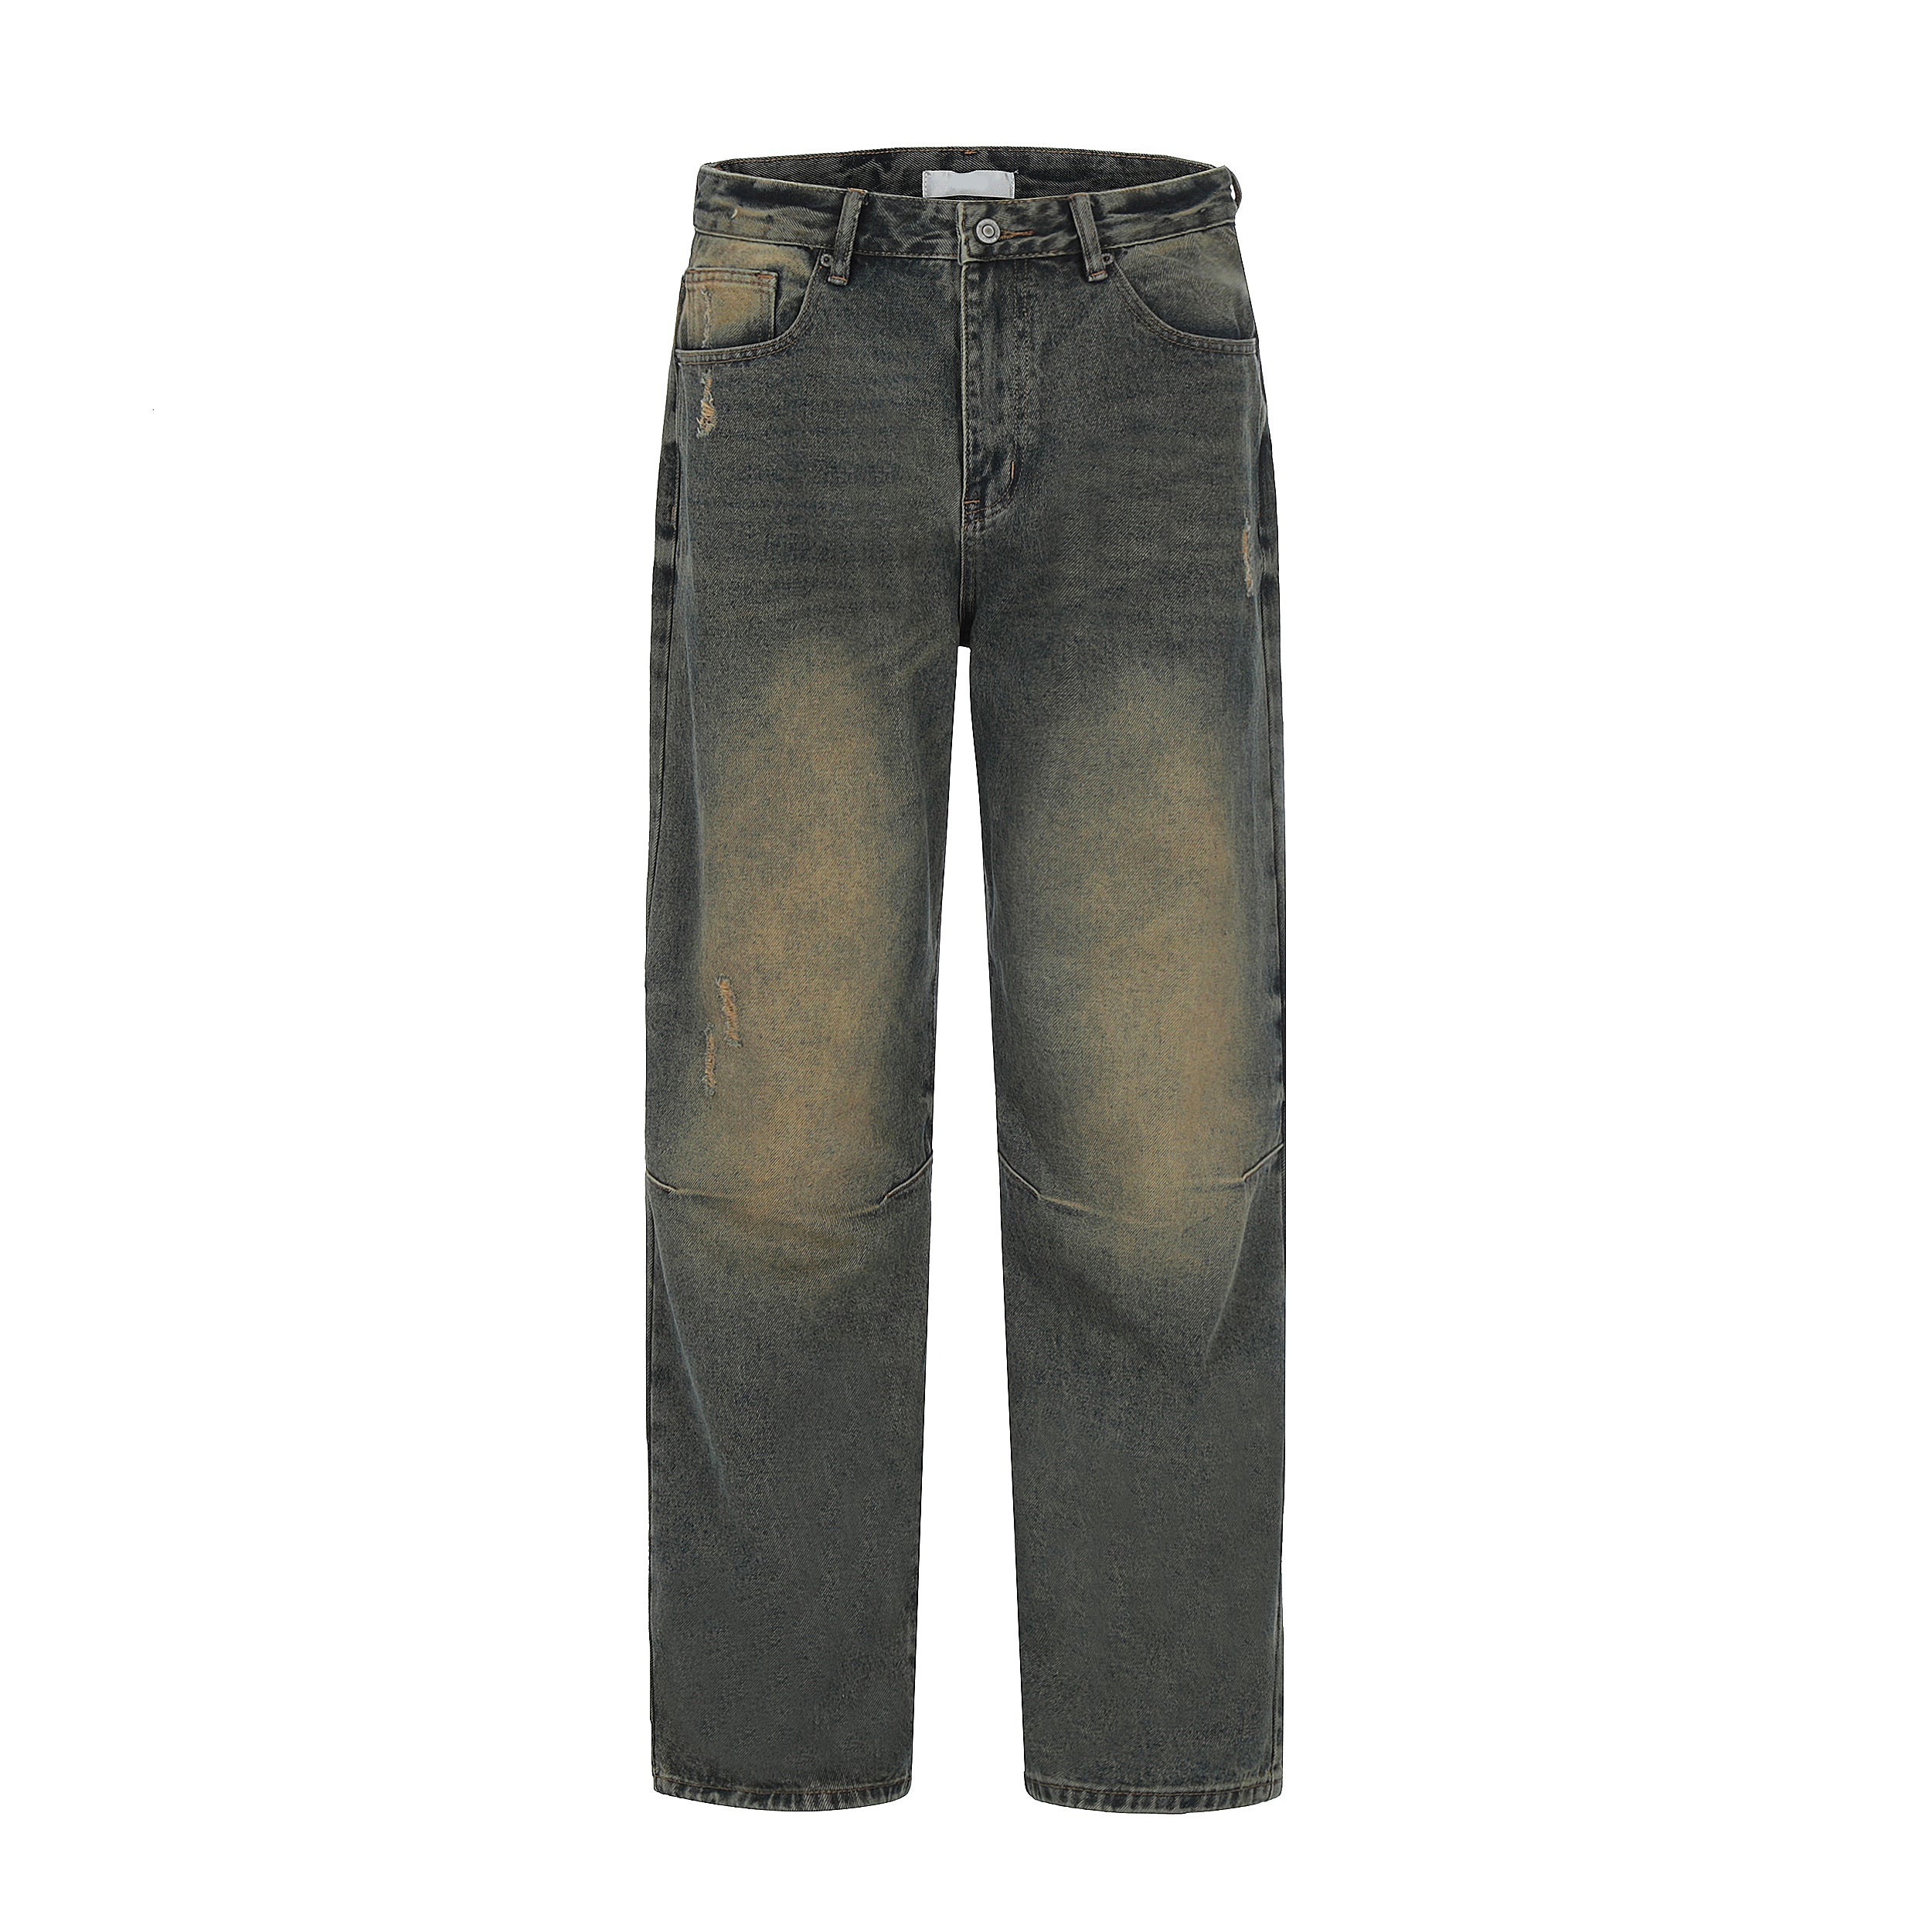 Faire Echo Retro washed yellow jeans